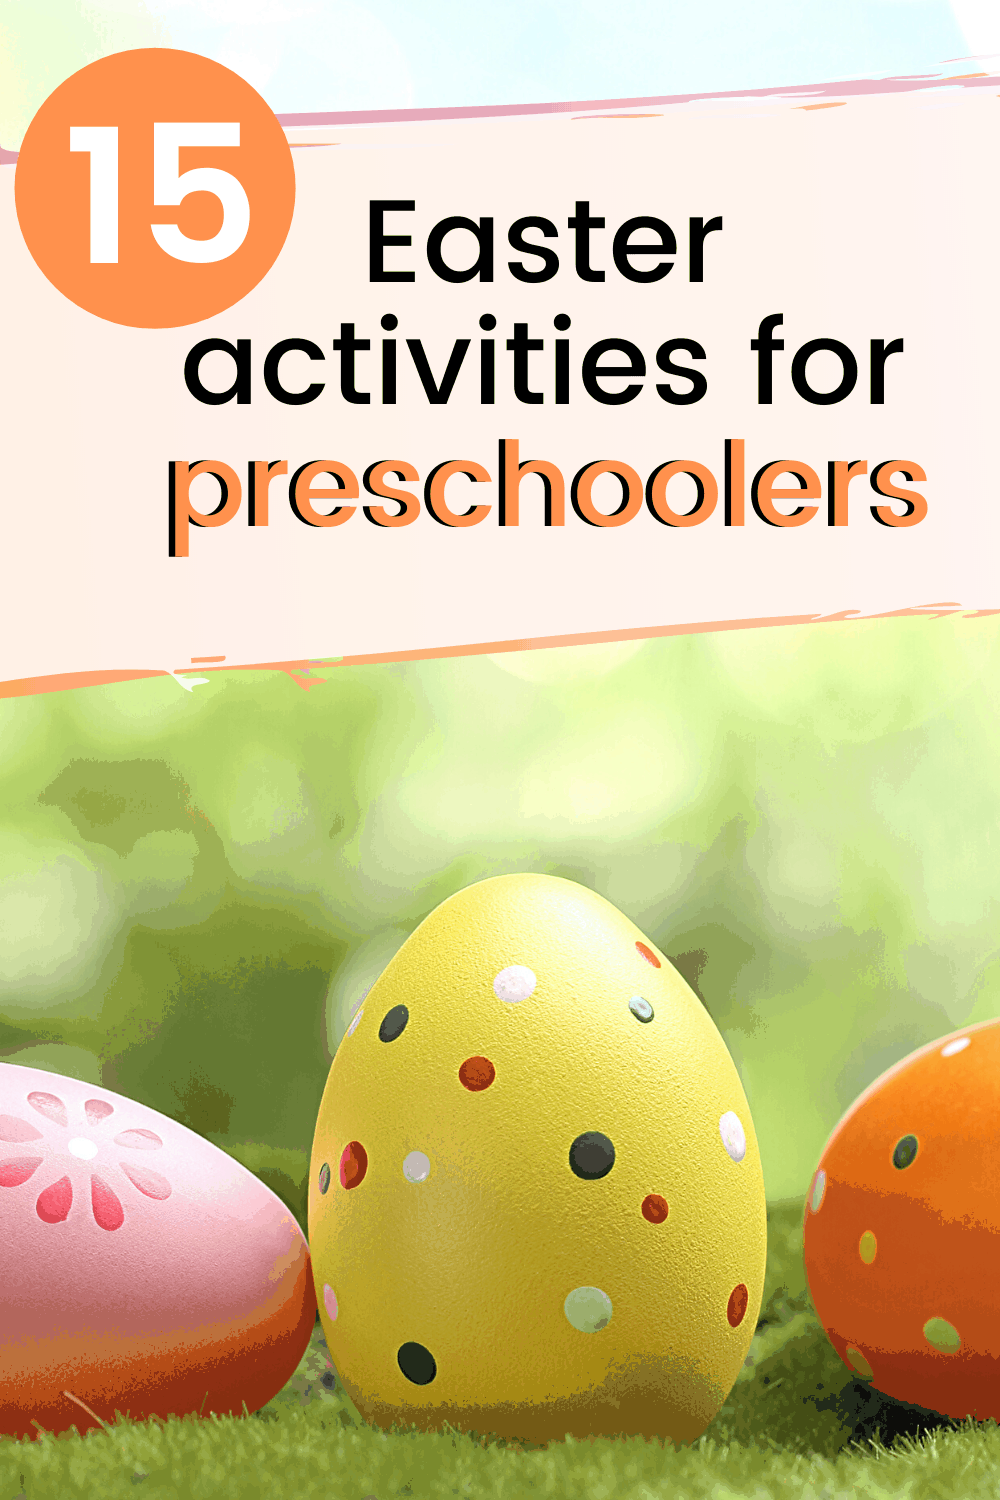 Enjoy these preschool Easter activities as a family as you learn more about spring, Jesus, and the real meaning of Easter!